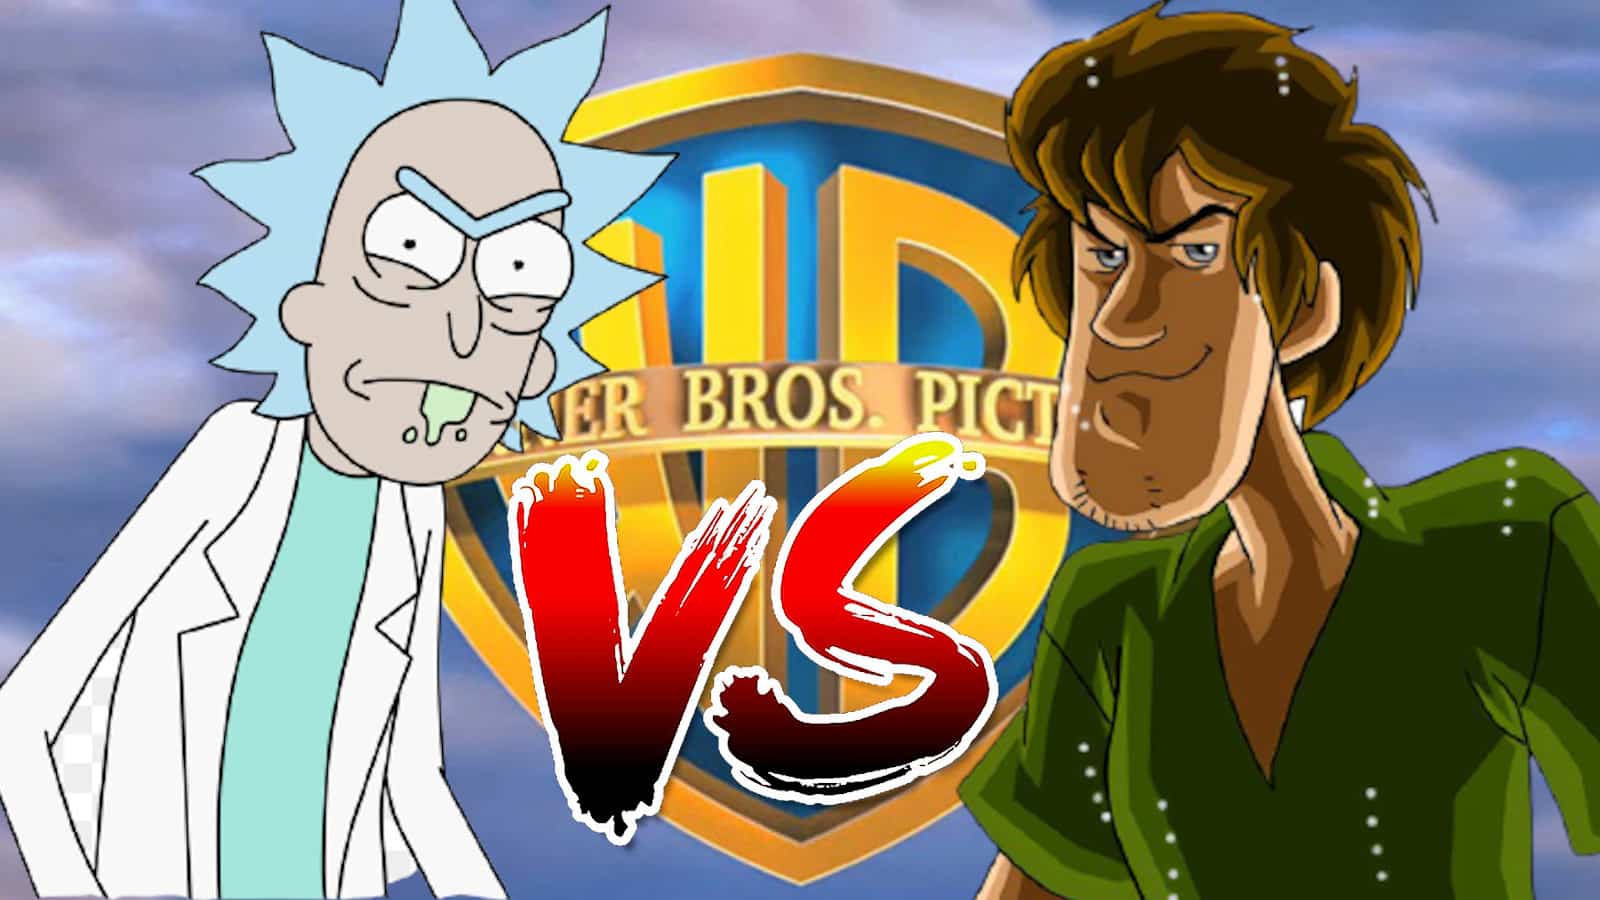 Rick from Rick & Morty vs UI Shaggy in Smash Ultimate